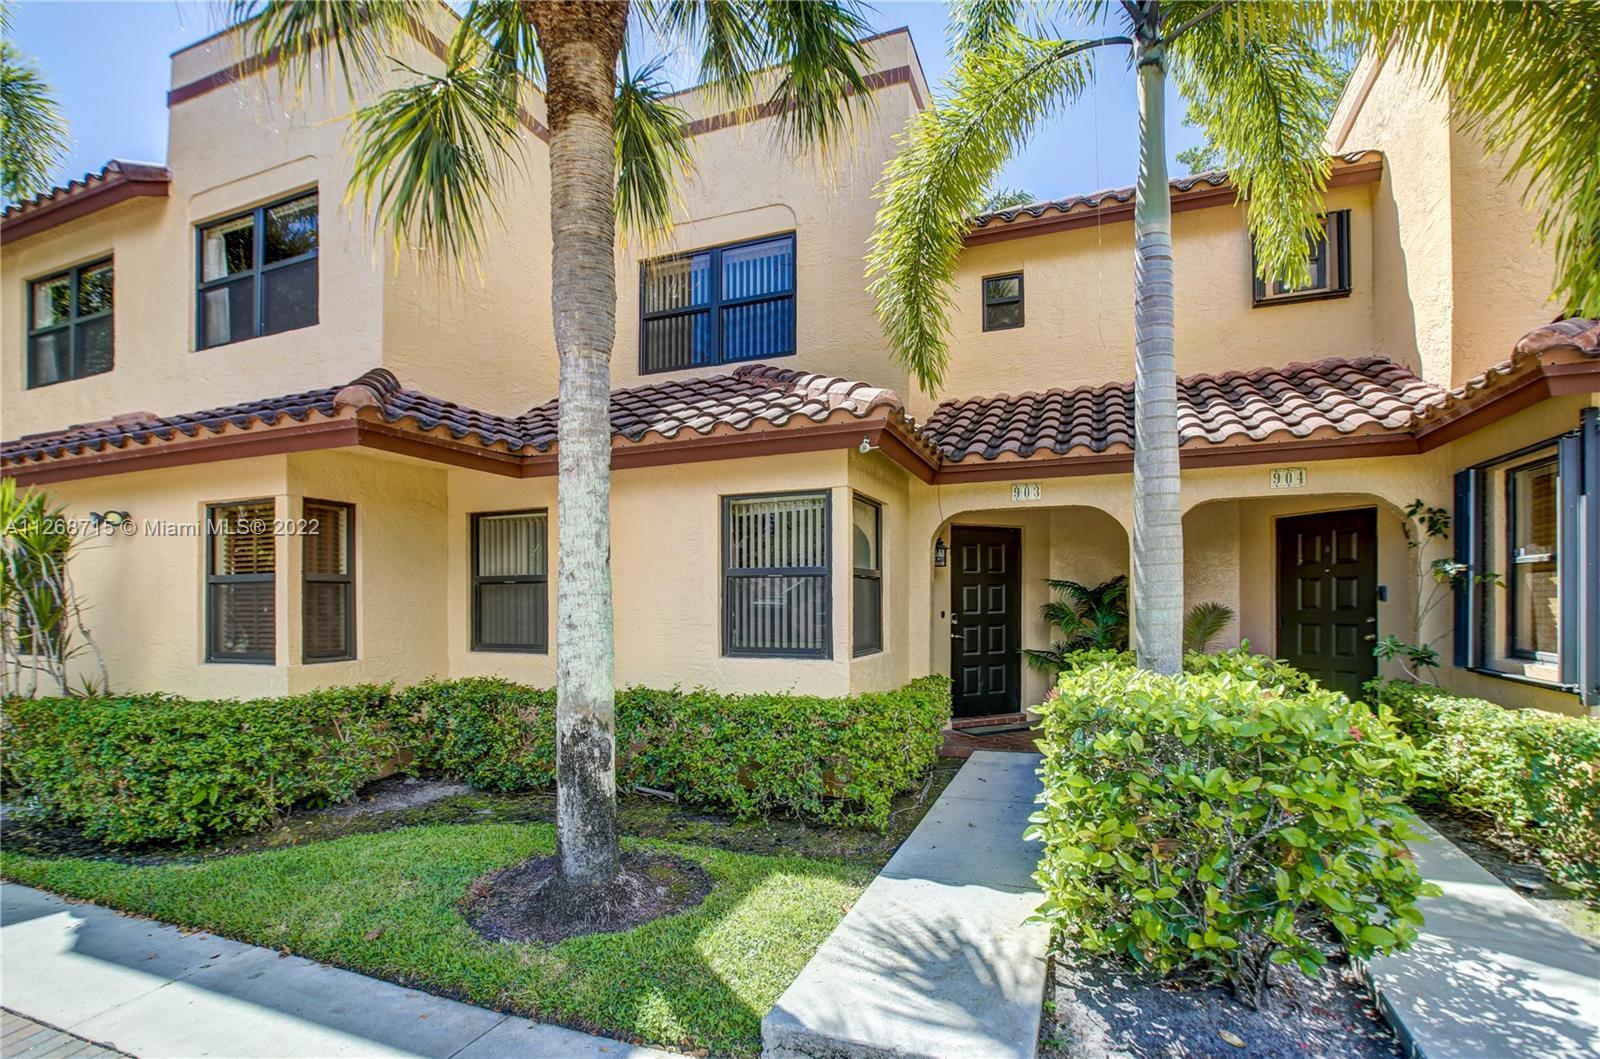 Check Out this Move in Ready, COMPLETELY REMODELED, Immaculate Home in the Heart of Fort Lauderdale!